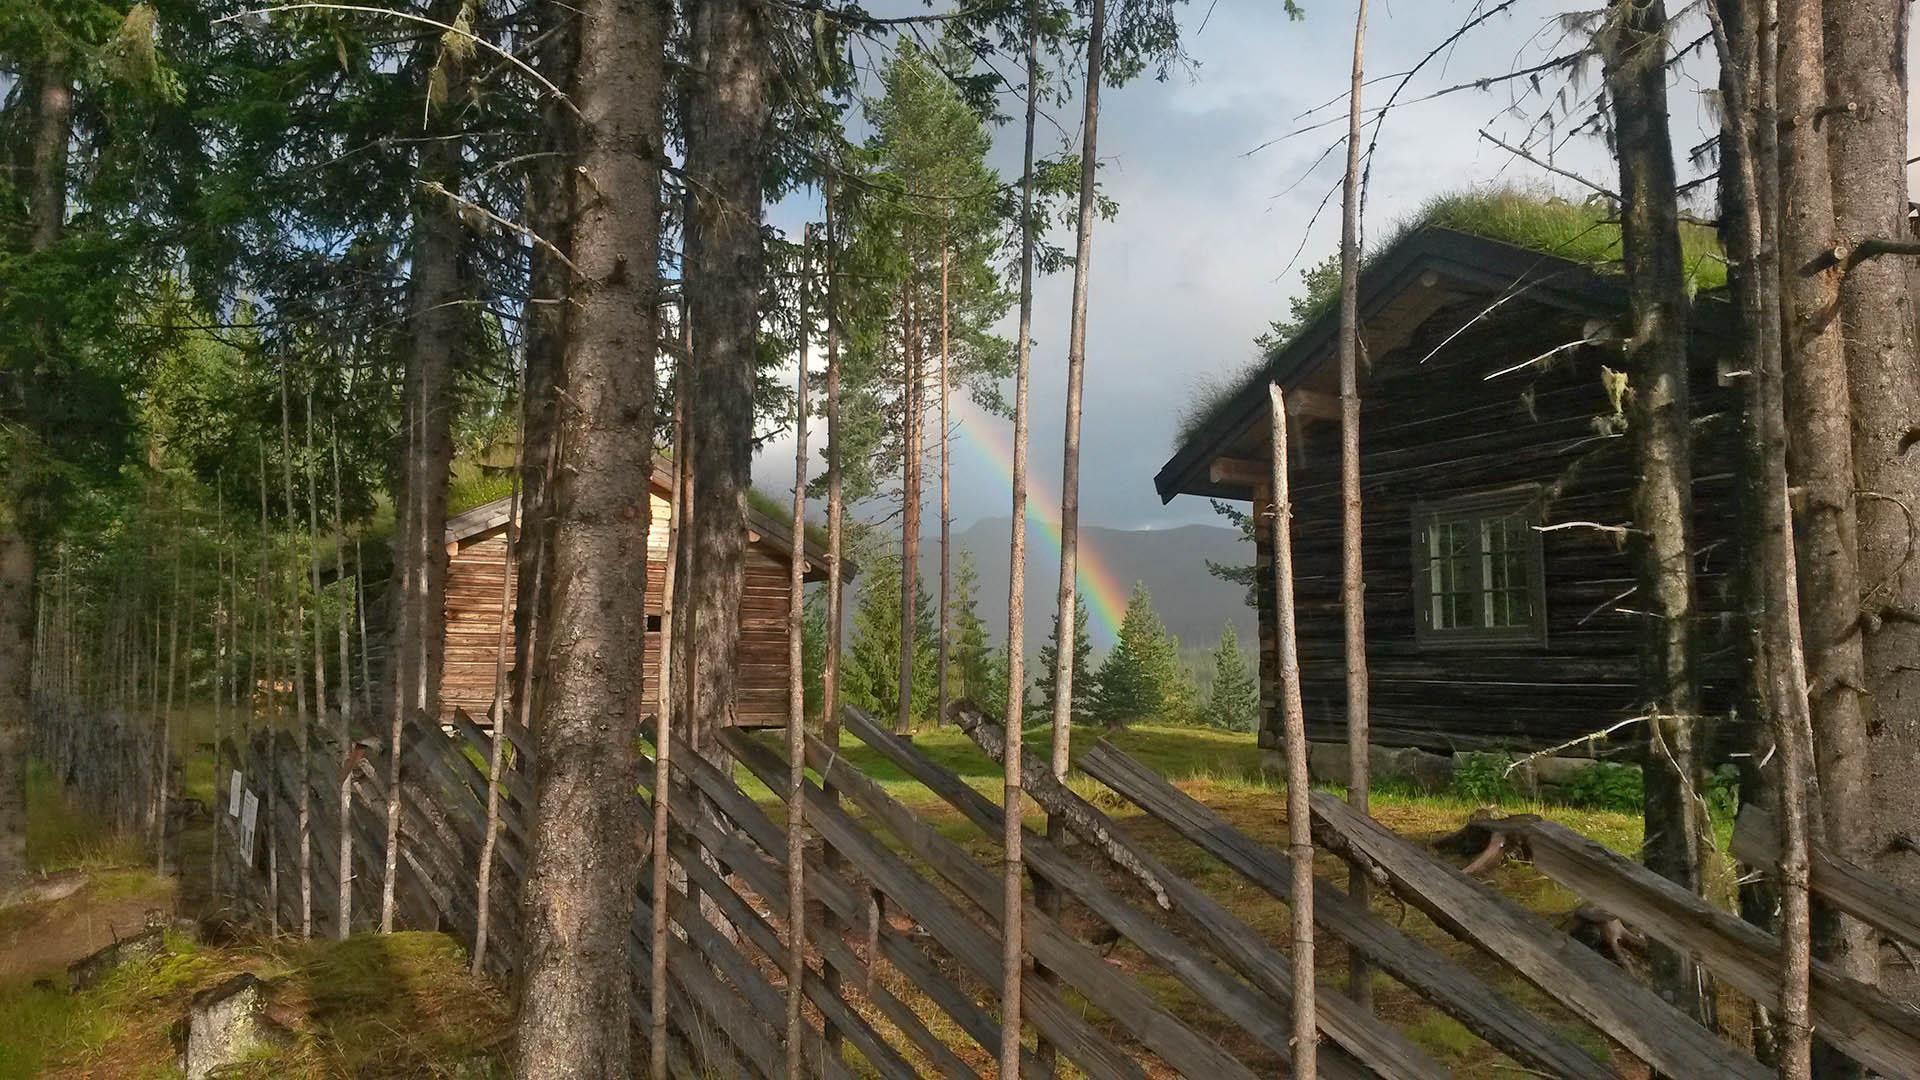 Round pole fence in front of old log cabin with grass roof and a rainbow